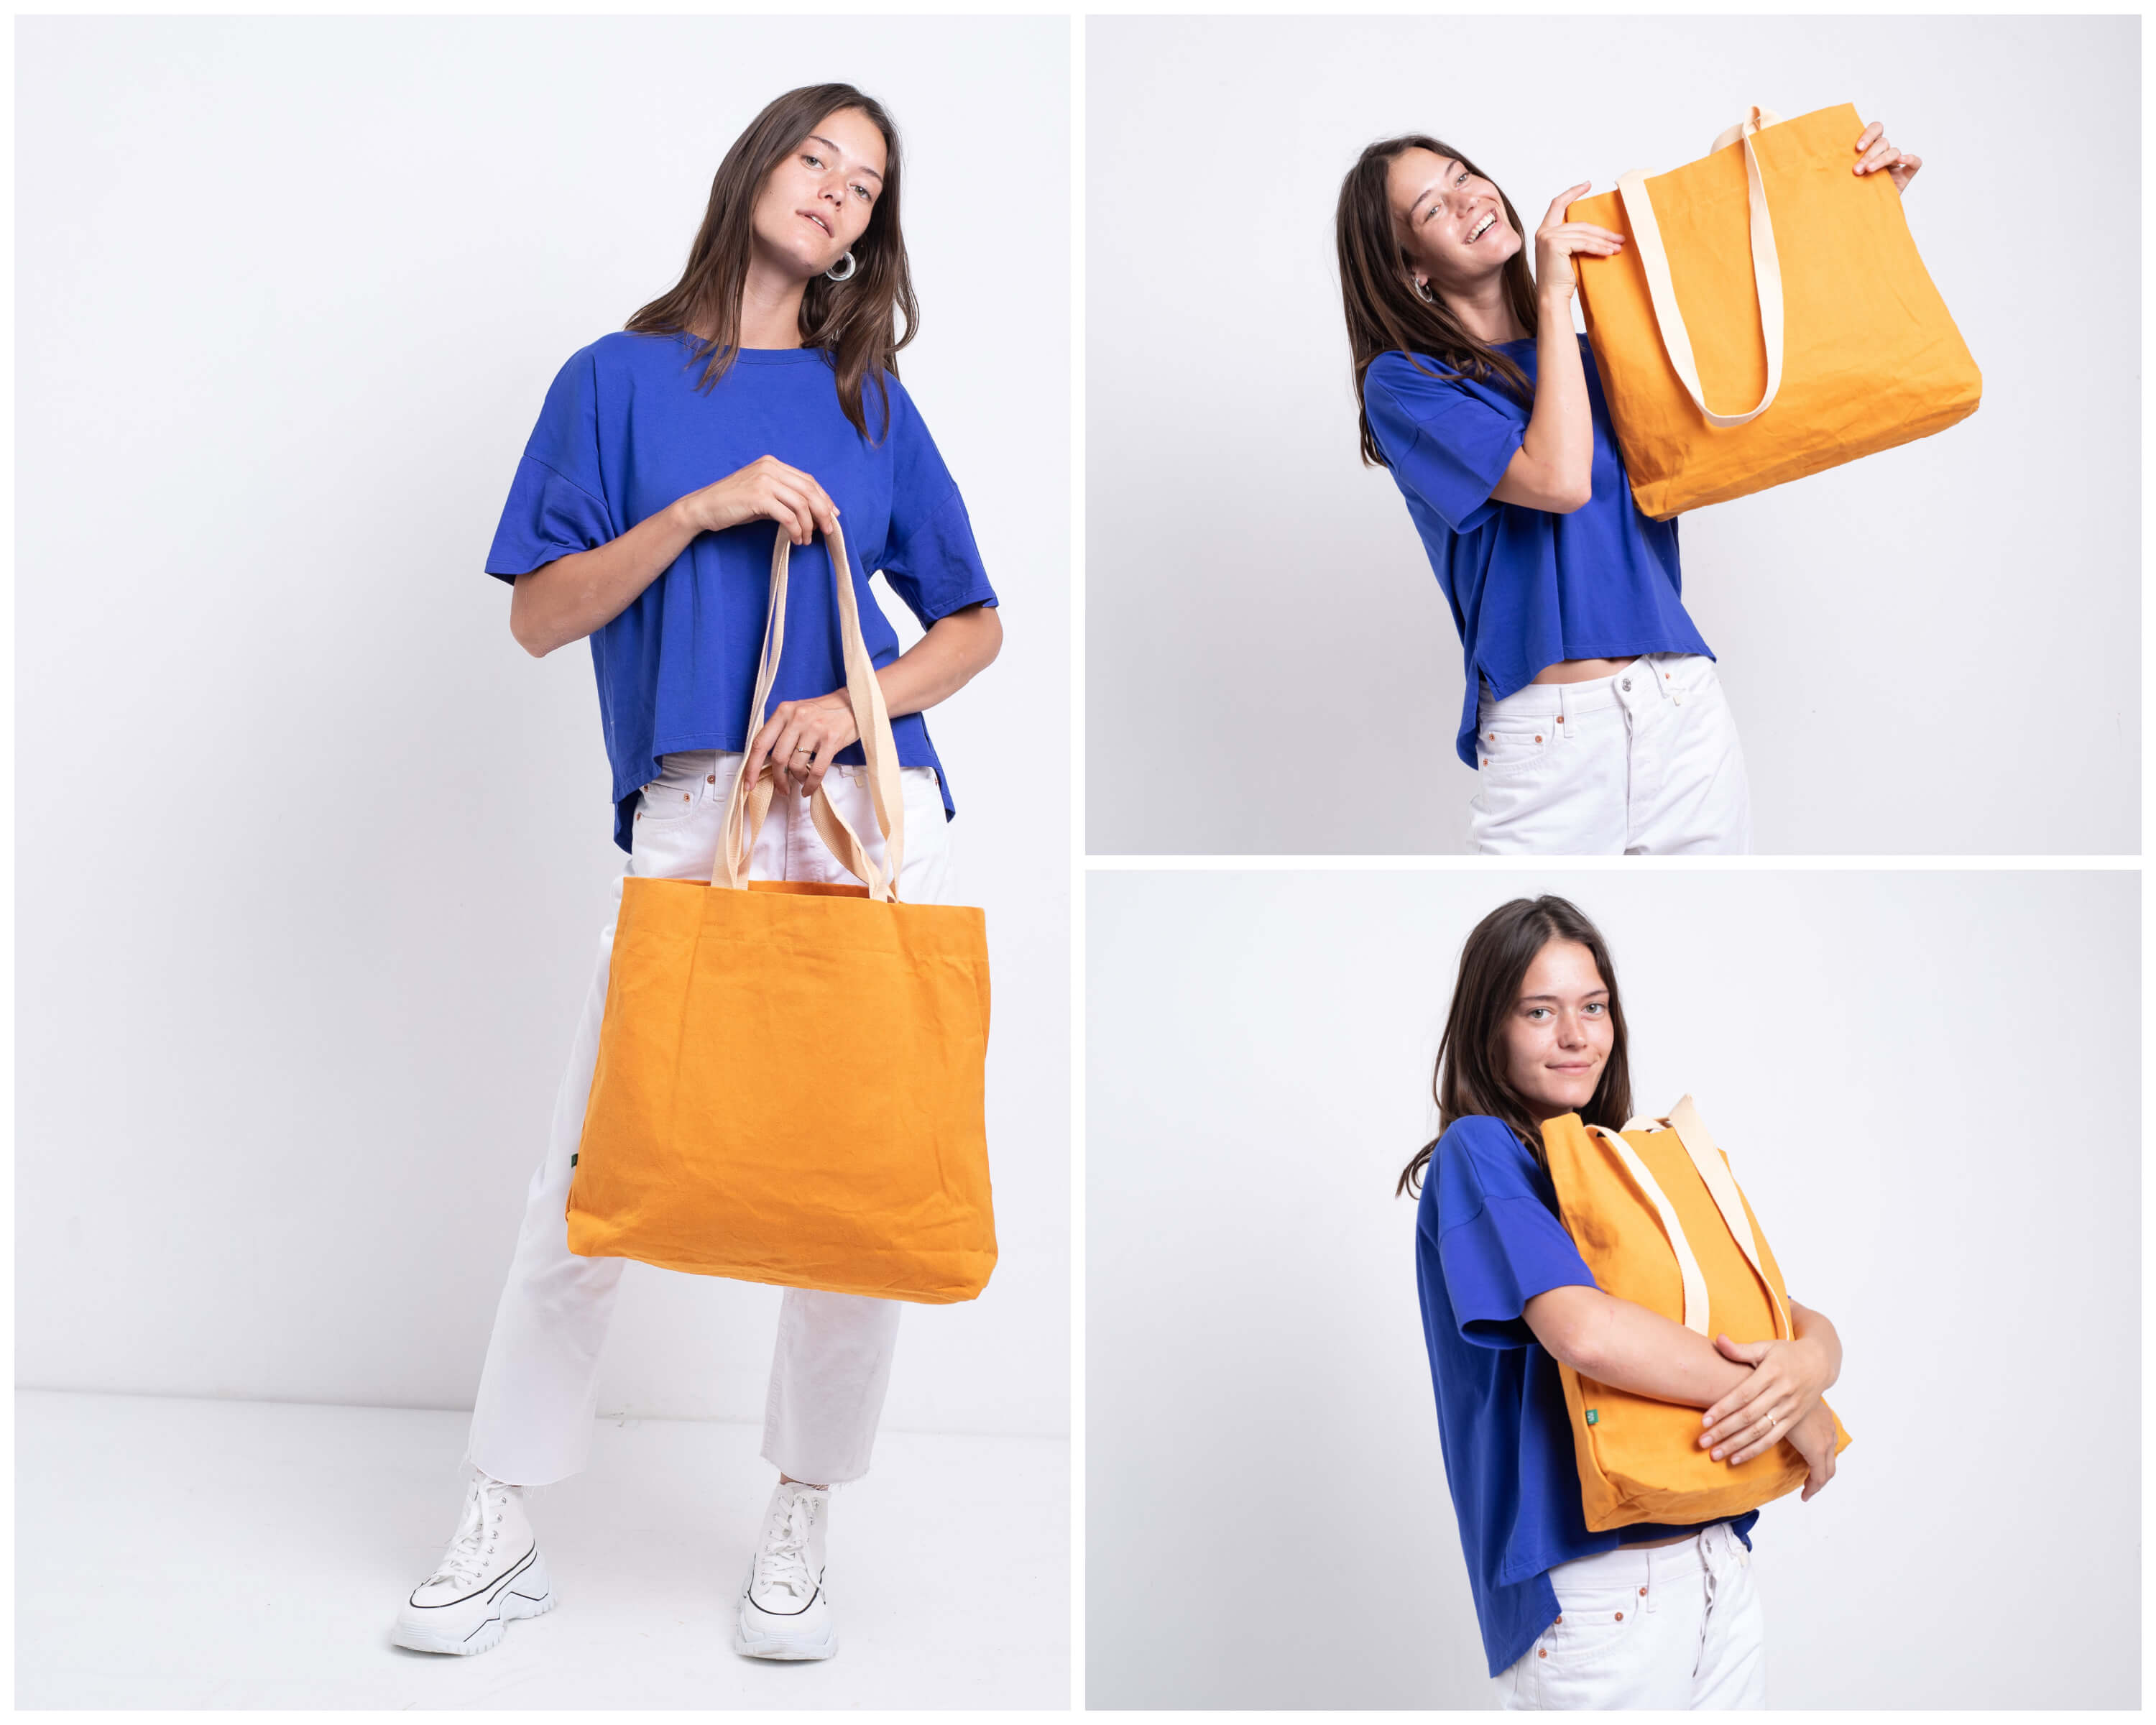 The Marvelous, Large Tote Bag, Big Leather Crossbody Purse